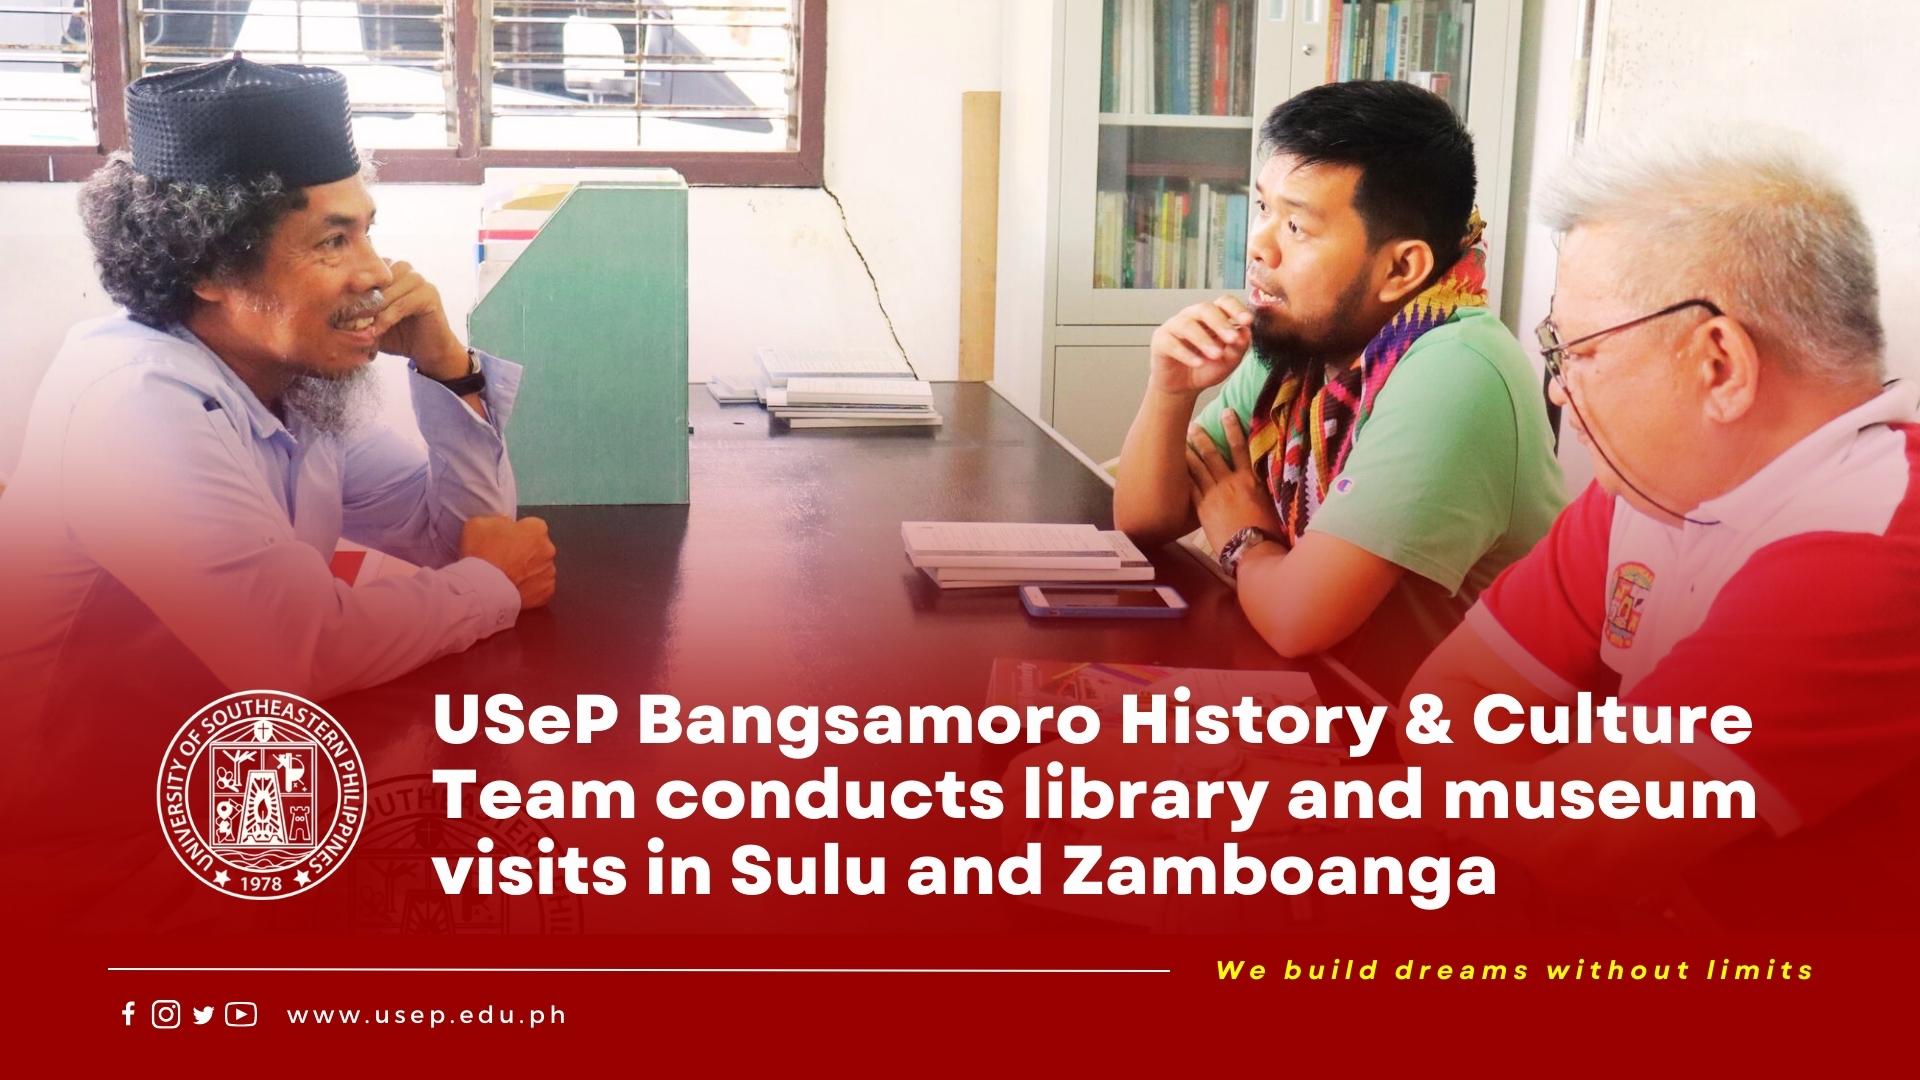 USeP Bangsamoro History & Culture Team conducts library and museum visits in Sulu and Zamboanga